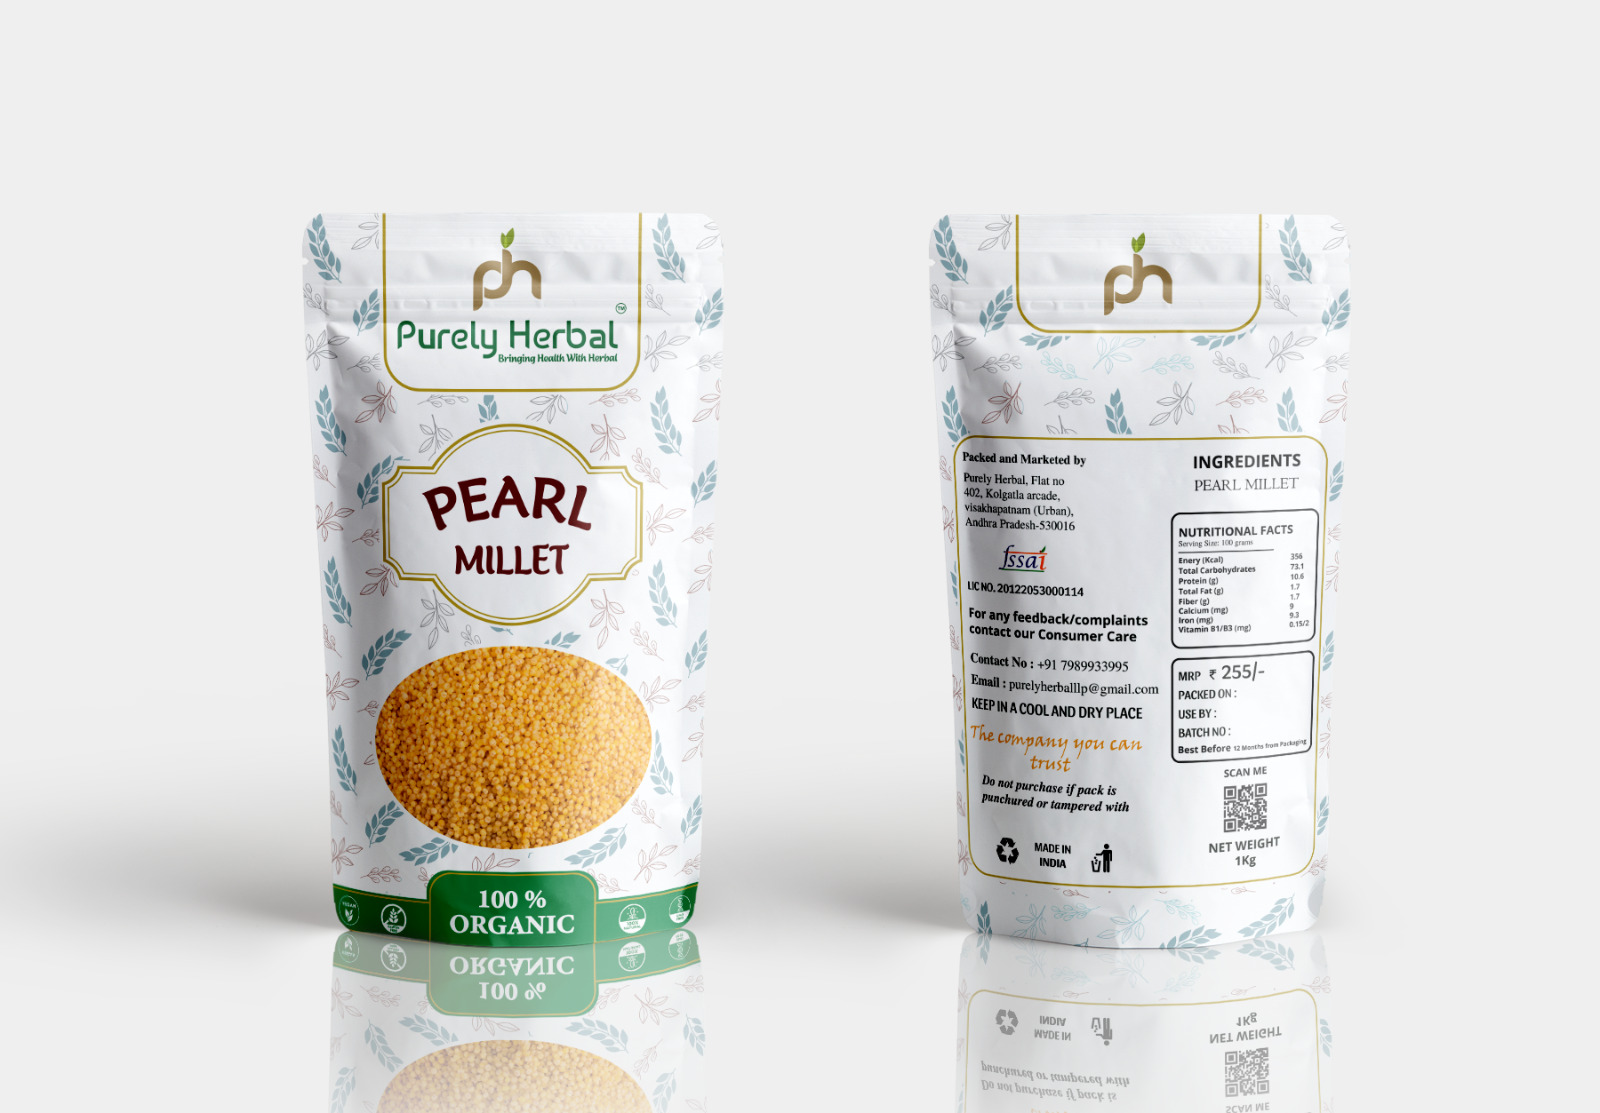 Purely Herbal Pearl Millets